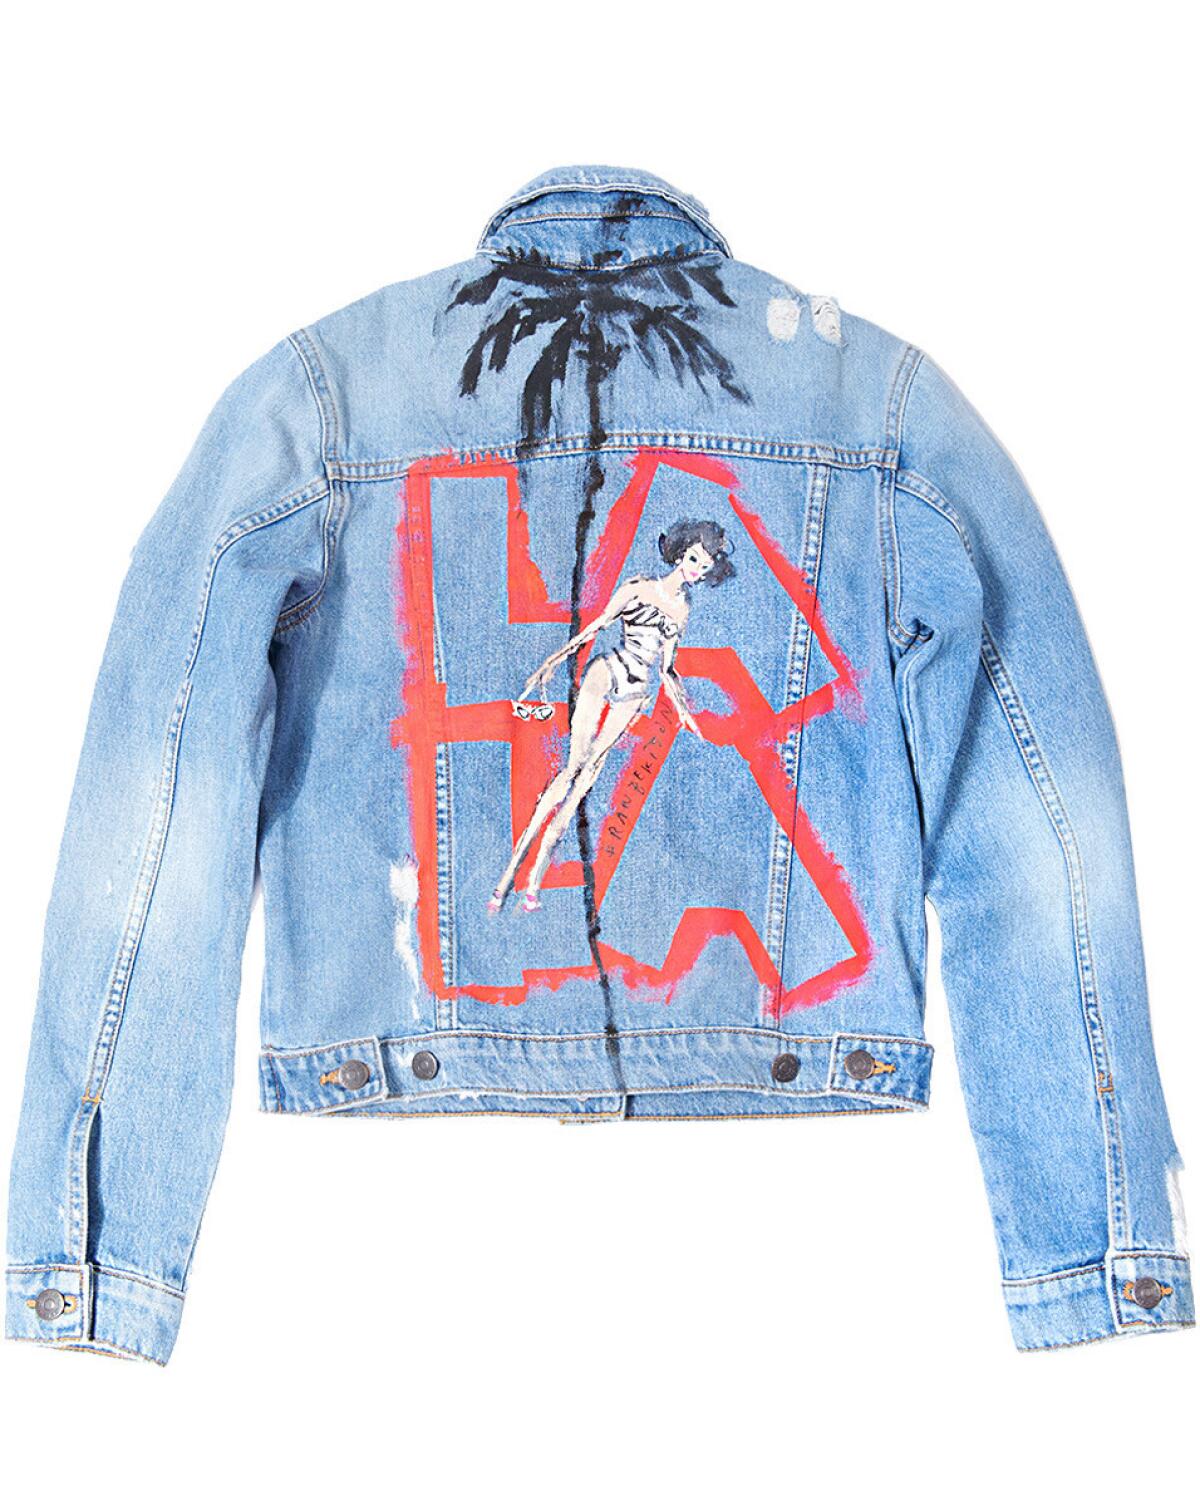 Ten one-of-a-kind jean jackets with Donald Robertson hand-painted illustrations were created to celebrate the new Veronica Beard store on Melrose Place in Los Angeles.